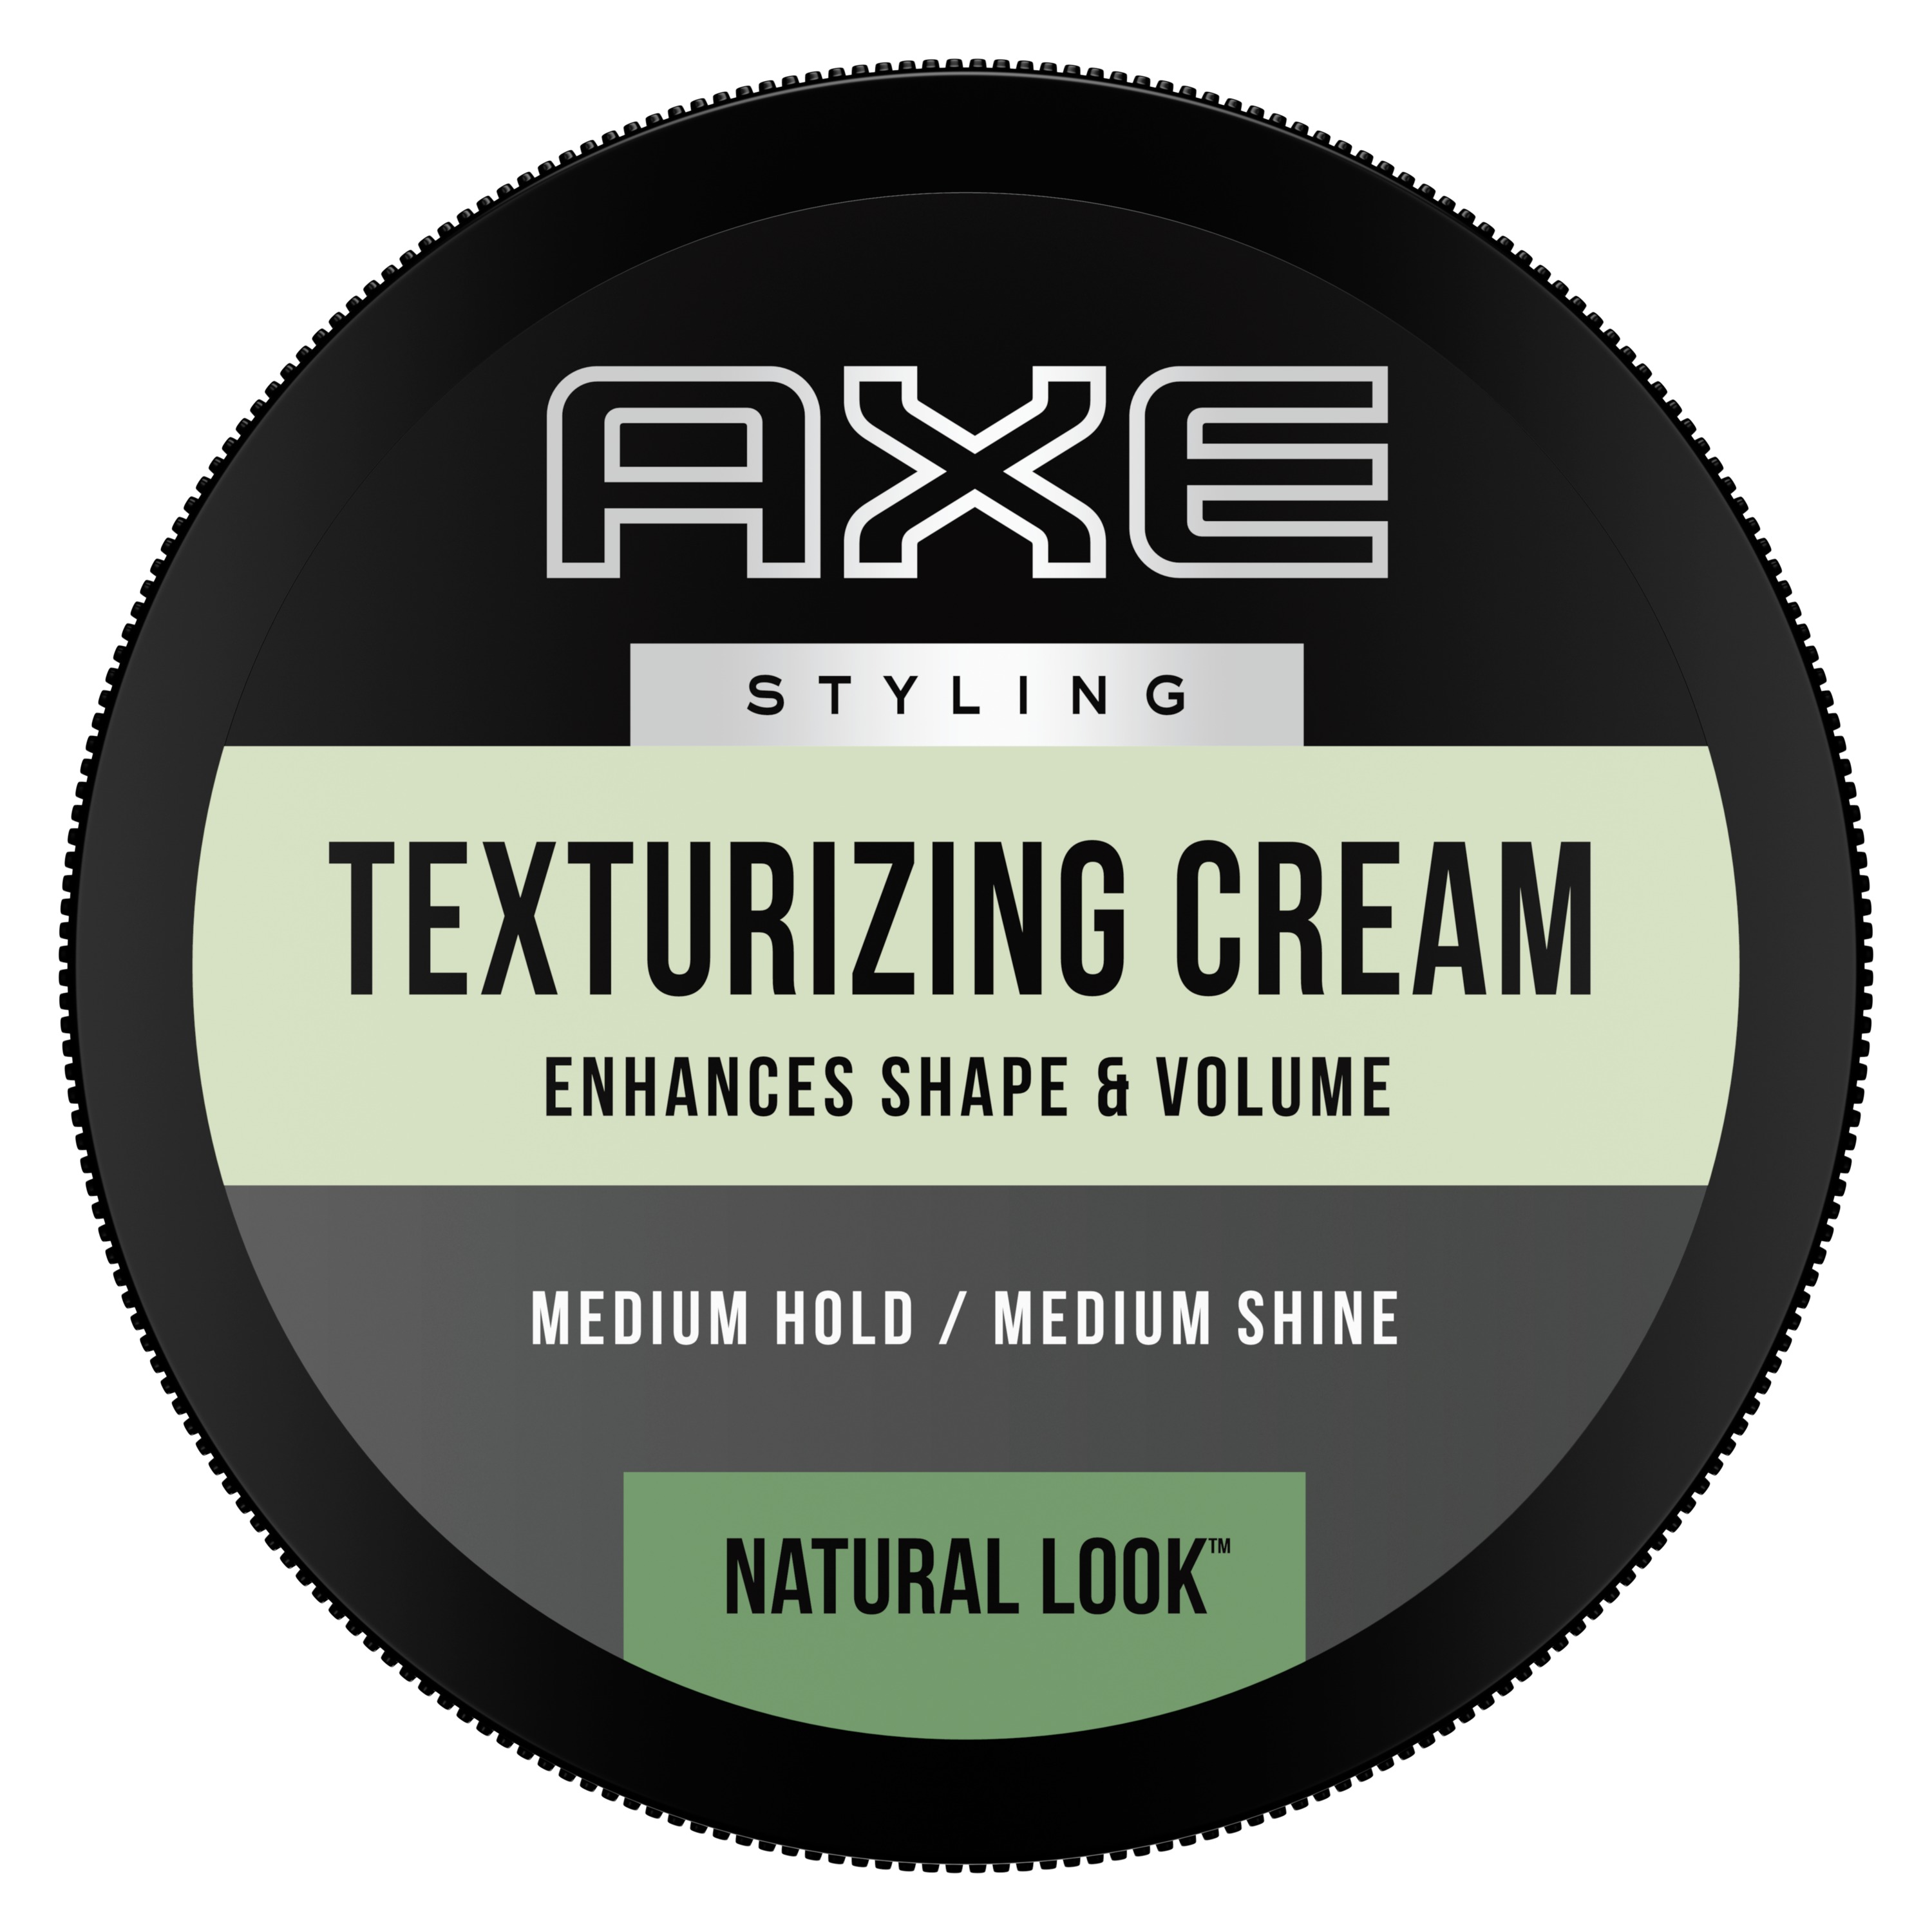 Axe Natural Look Texturizing Hair Styling Cream Hair Gel with Natural Beeswax, 2.64 oz - image 2 of 5